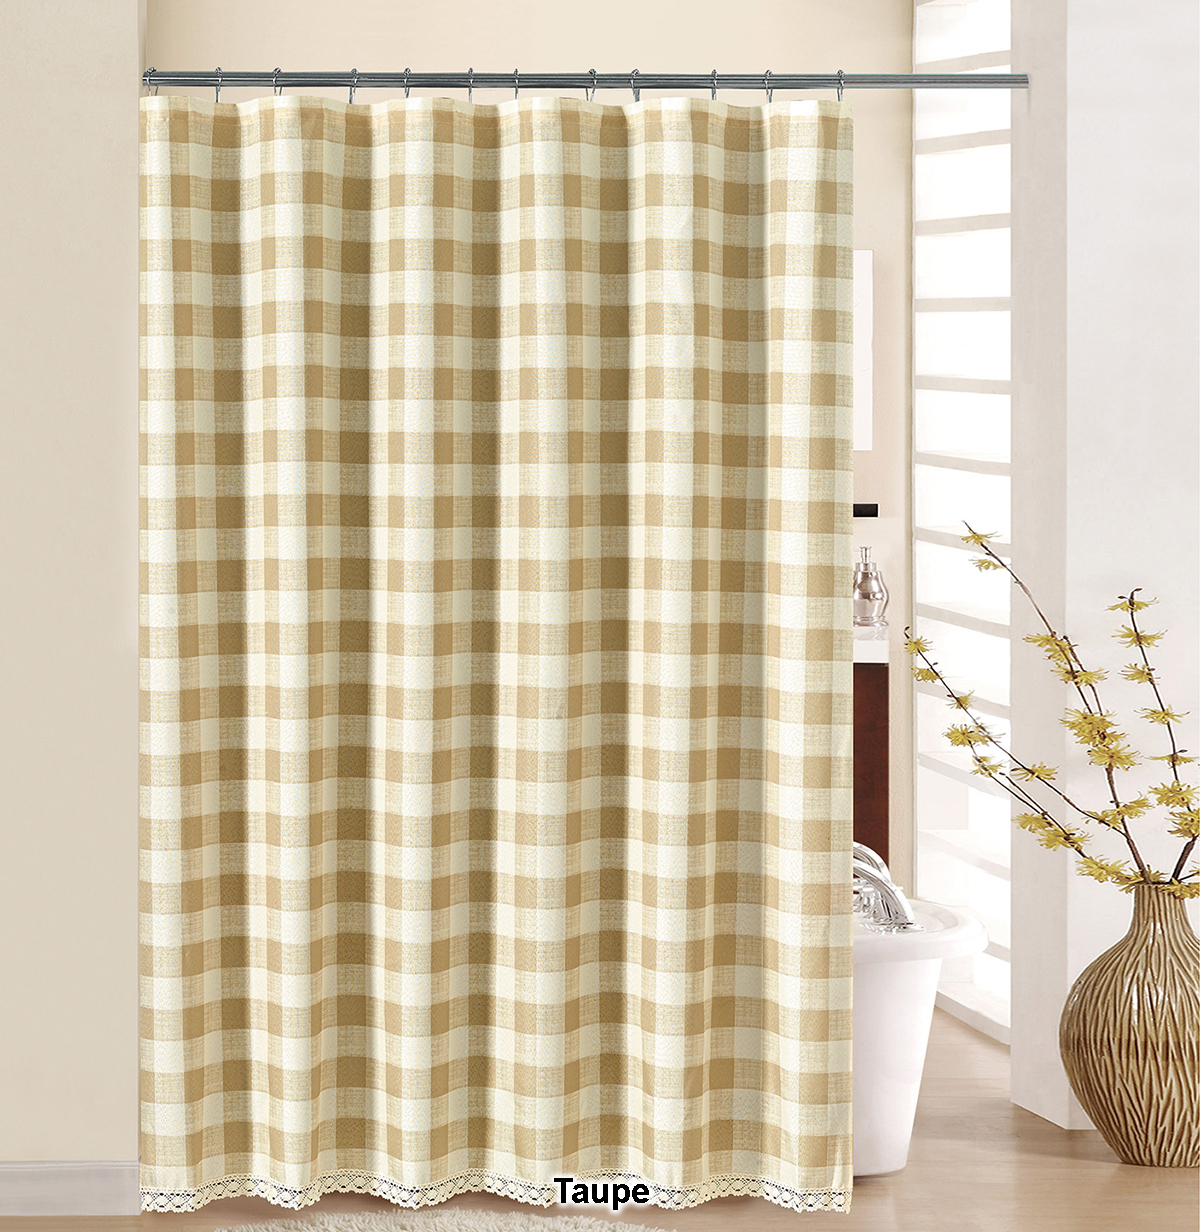 Marigold Grove(tm) Check Lace Shower Curtain